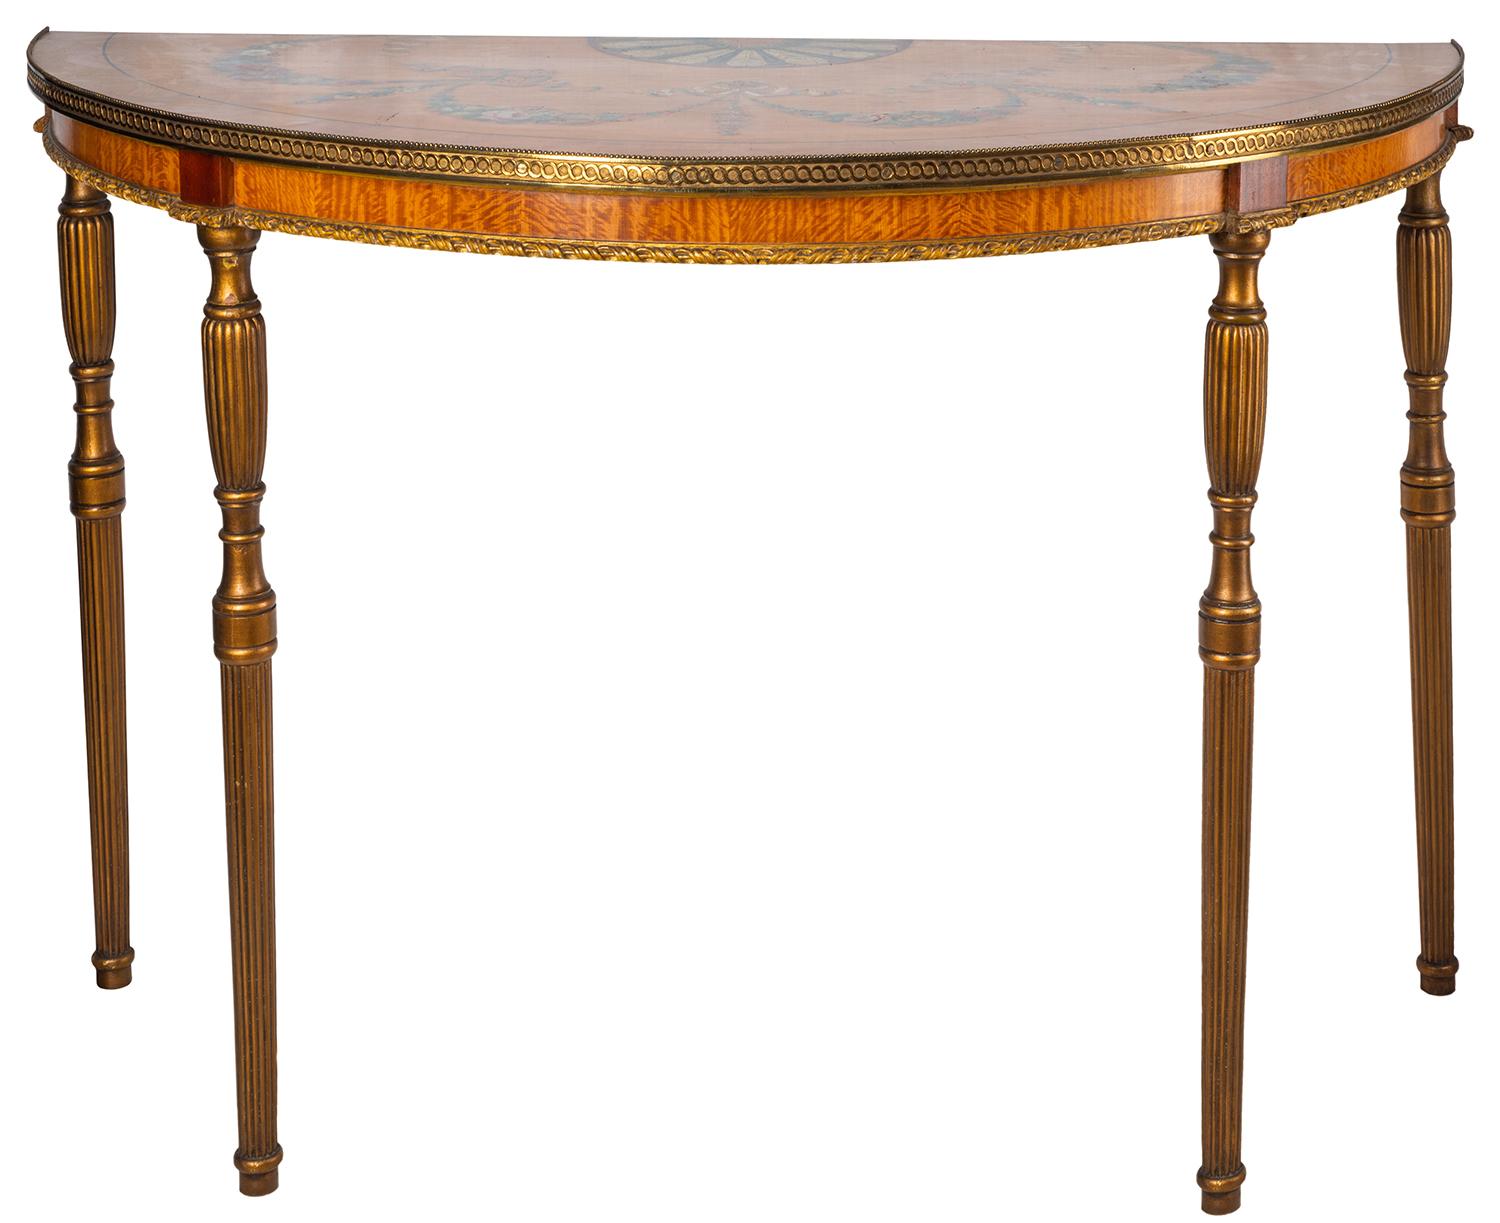 An beautiful pair of 18th century style Sheraton revival satinwood demilune side tables, each with wonderful hand painted floral swag, feather and ribbon decoration to the top, gilded ormolu moldings to the top and frieze, raised on turned tapering,